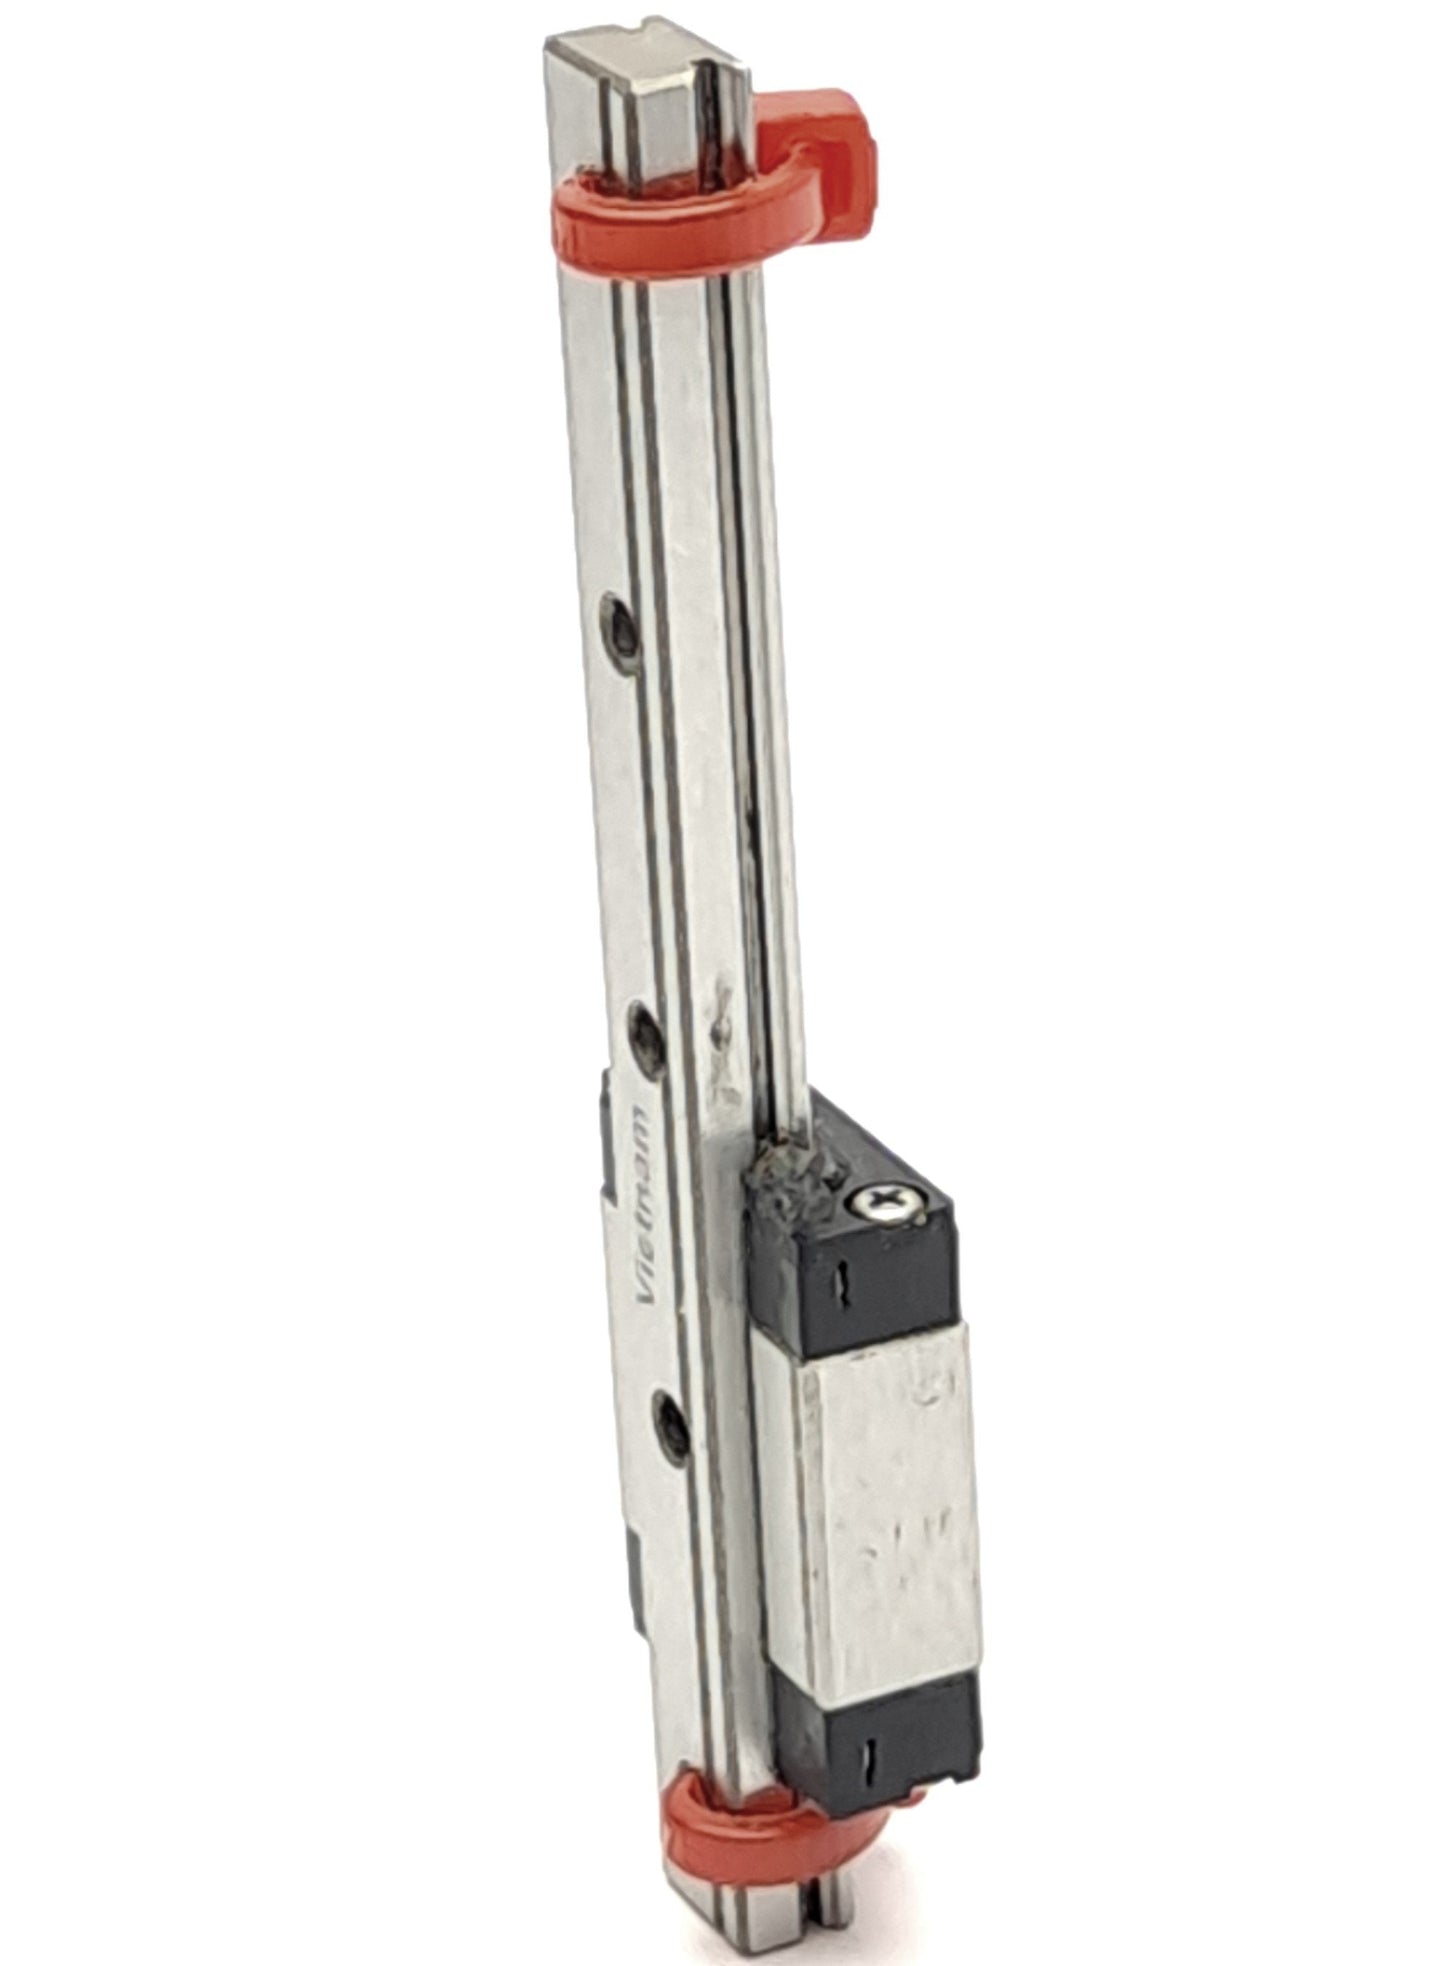 New Other MiSUMi SSEBV8 Miniature Linear Guide Assembly, 8mm Height, 70mm Length, 56HRC SS